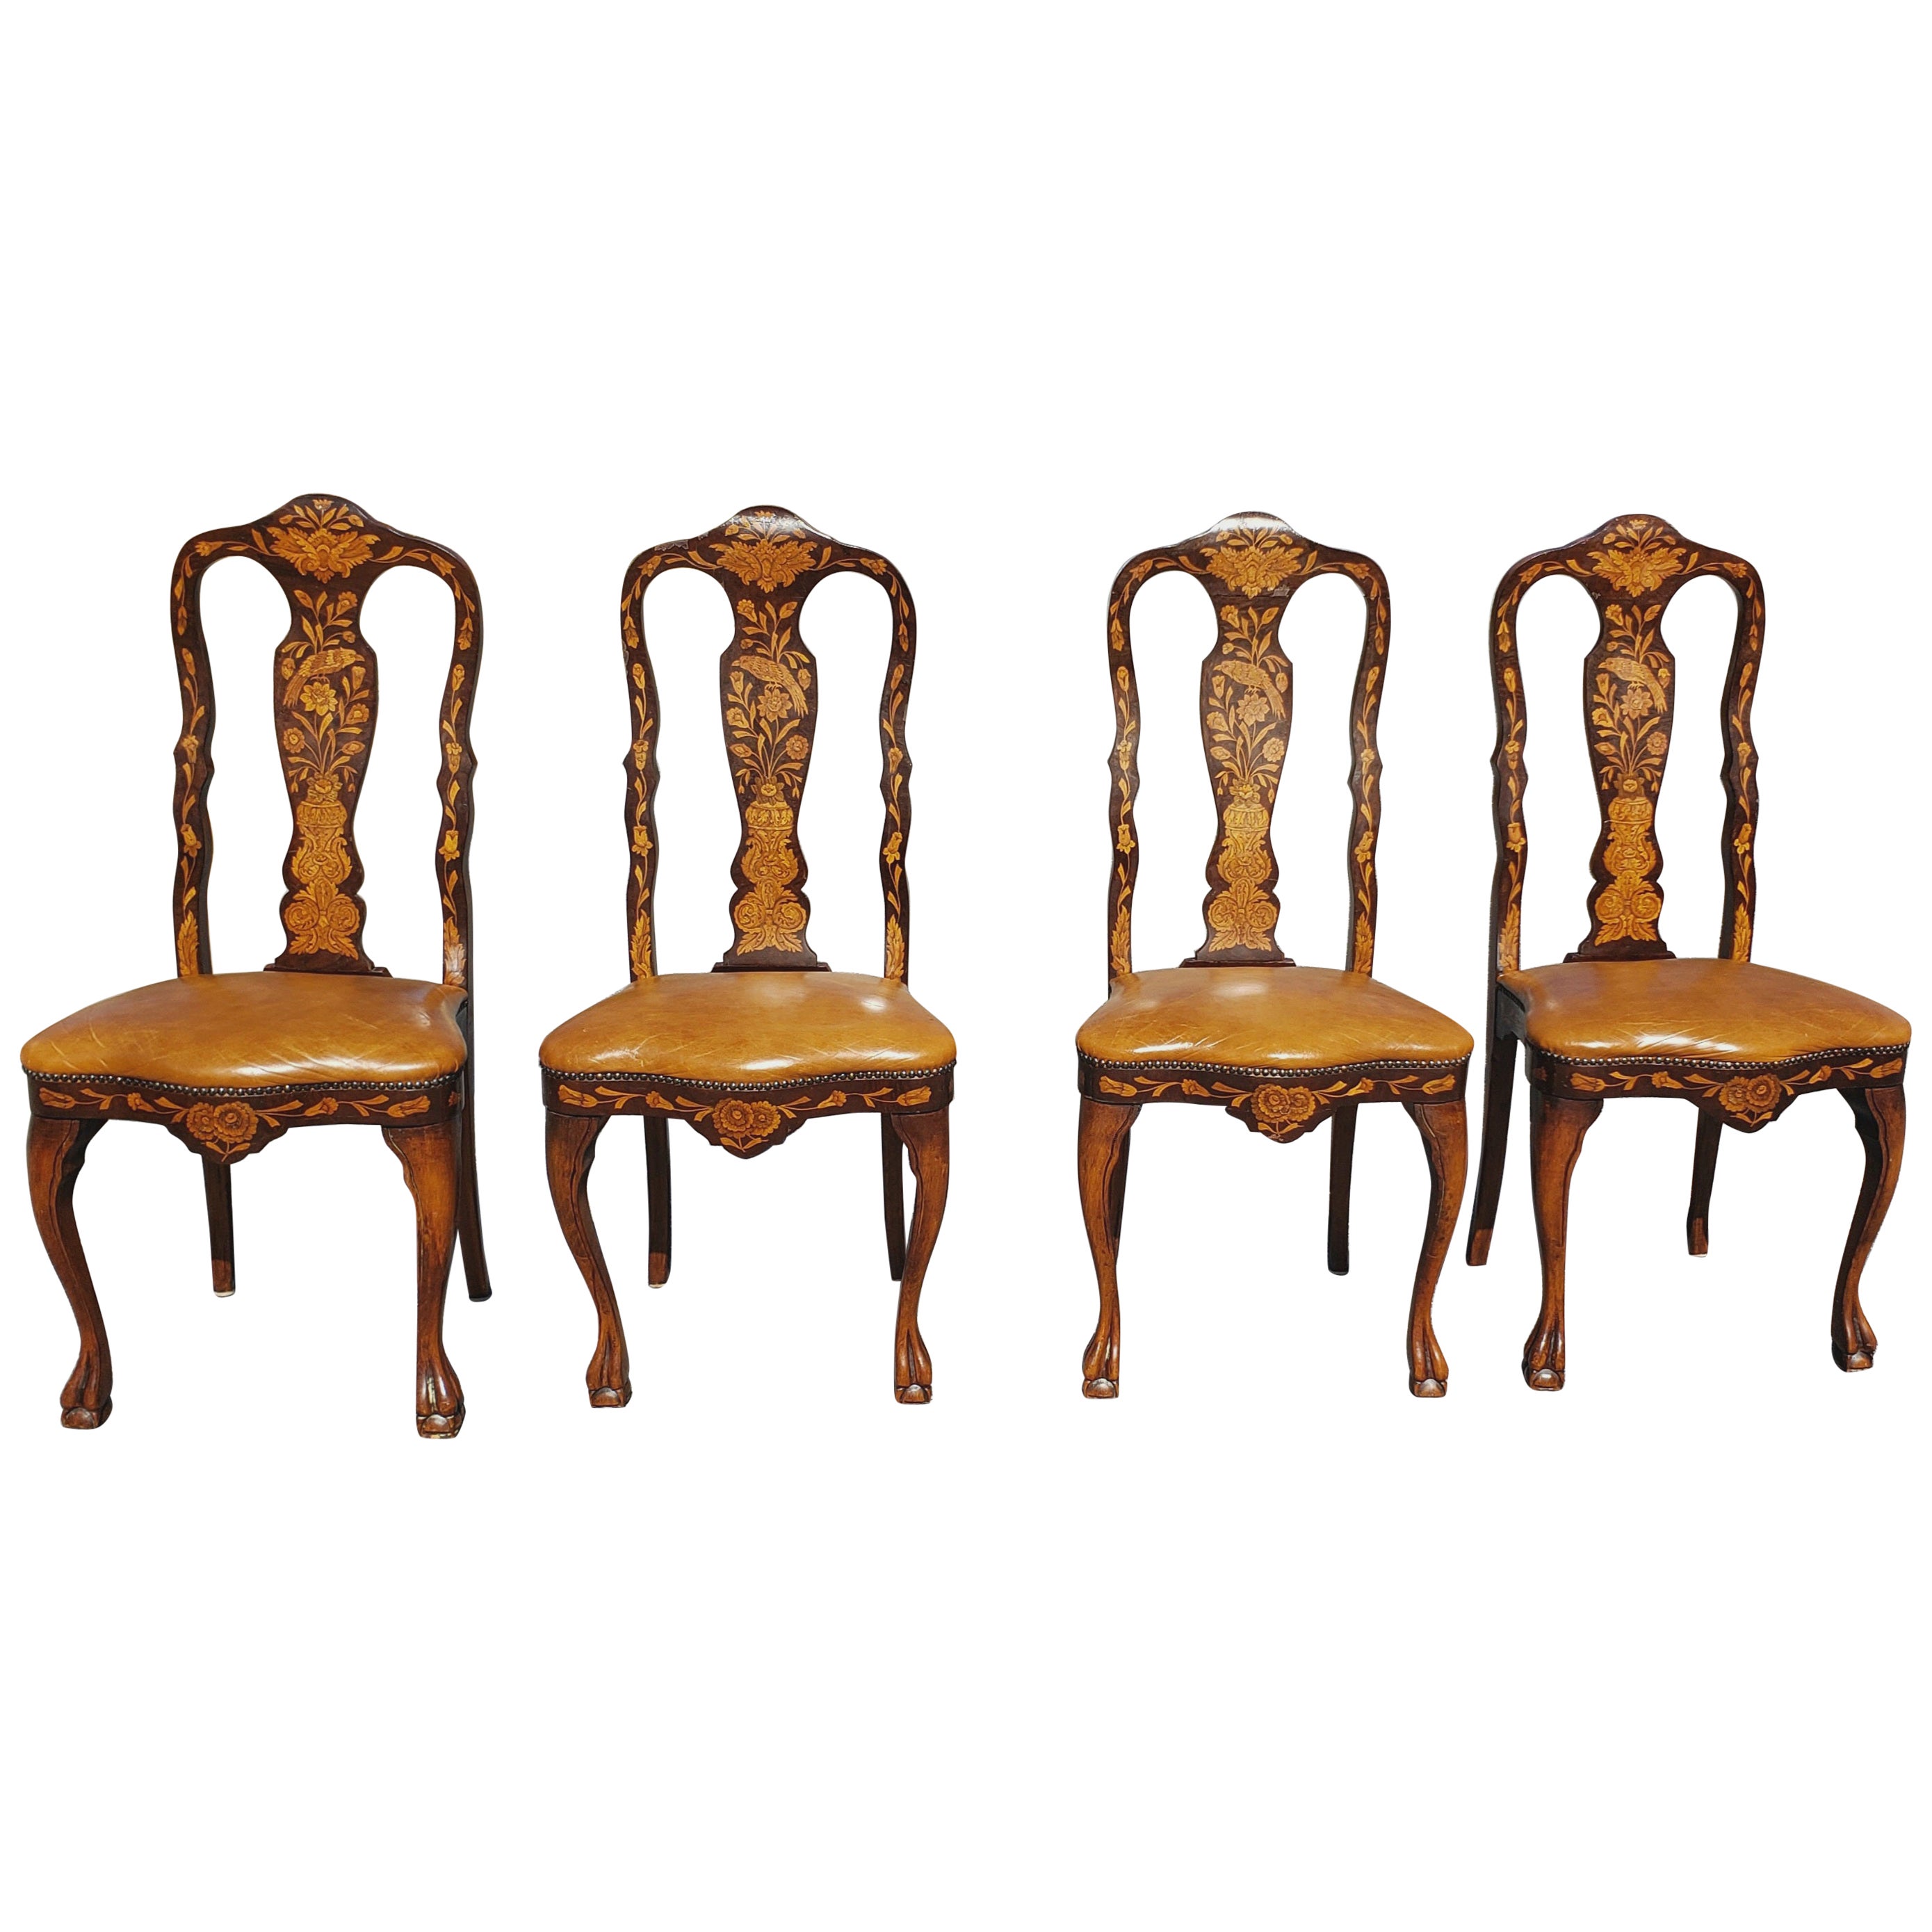 Set of 4 Dutch Marquetry Mahogany Satinwood and Leather Seat Dining Chairs